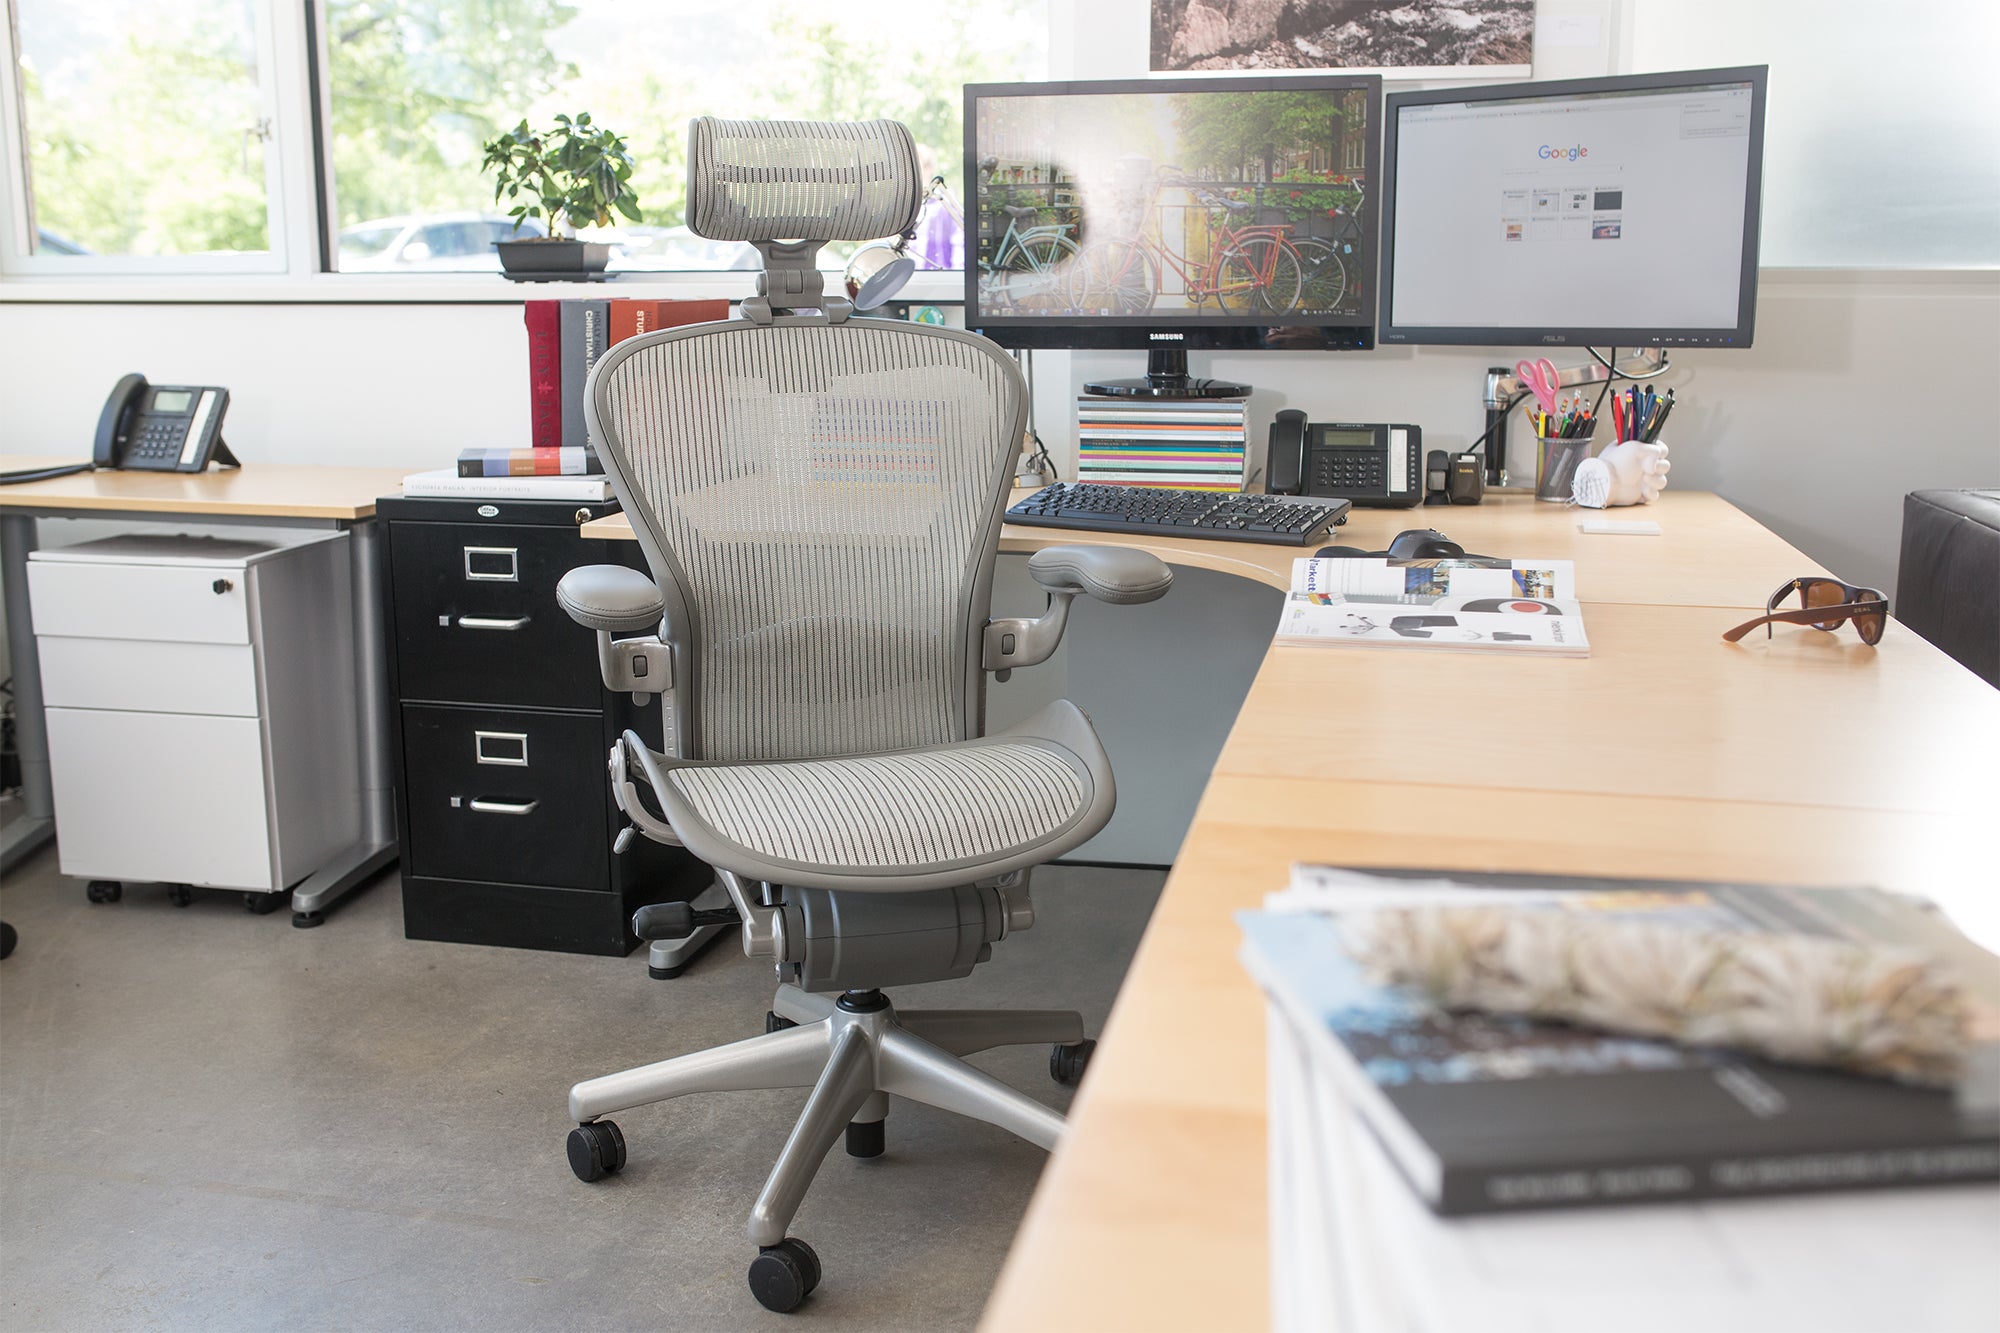 What Are The Most Popular Office Chairs On The Market?